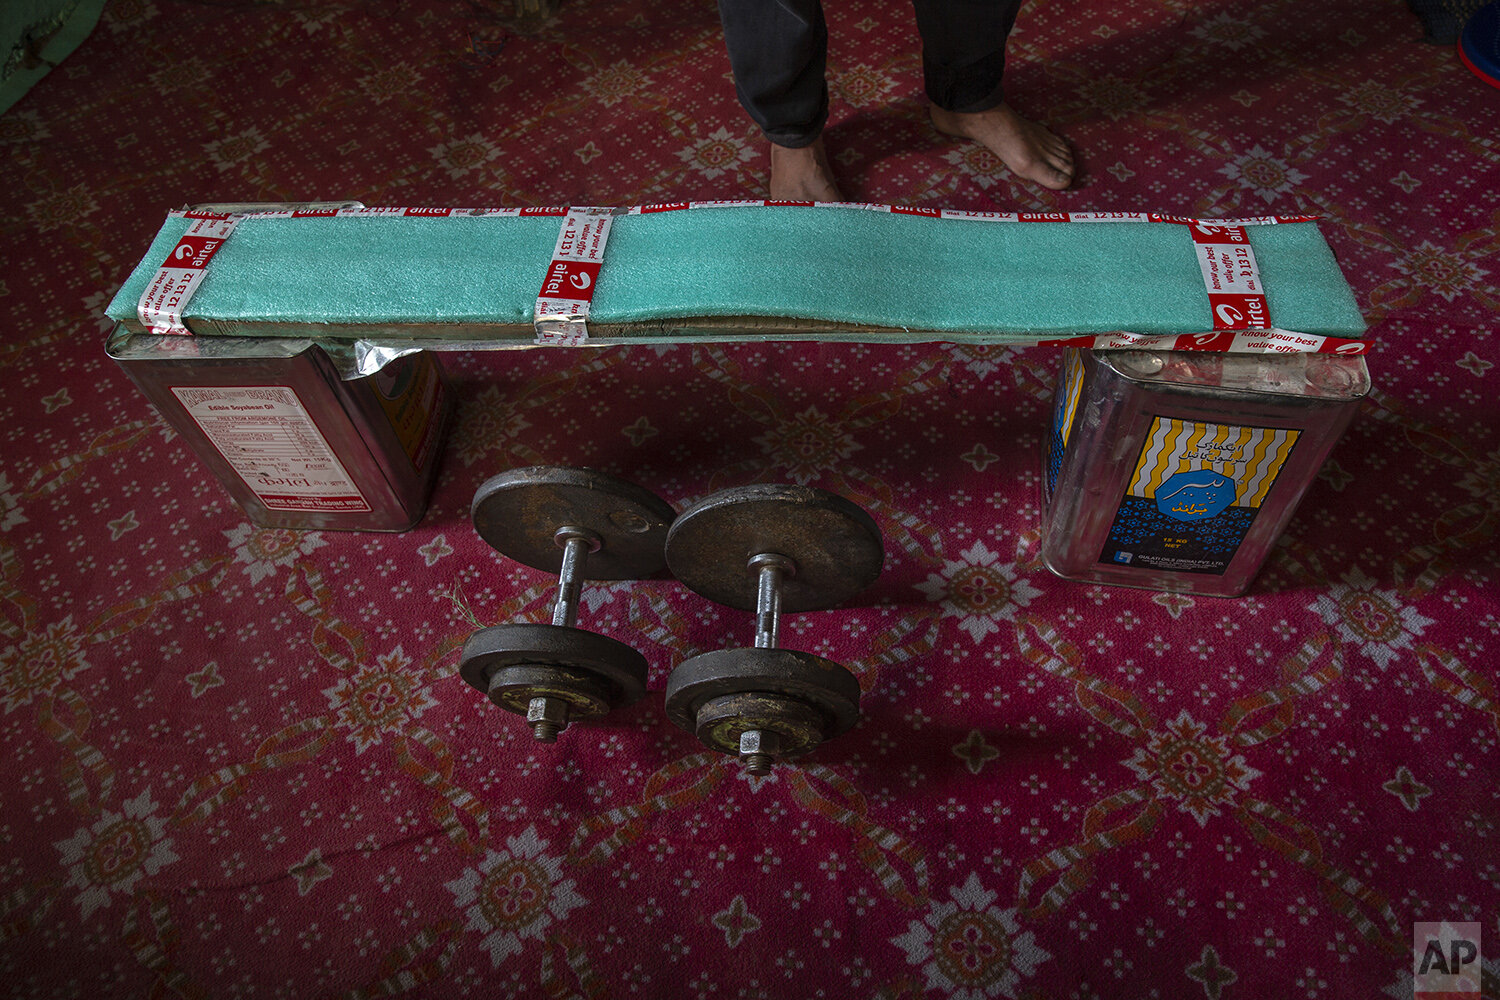  Weights lie next to a makeshift bench of tin boxes and wooden plank covered with thermocol inside the room of weightlifter Bashir Ahmed in Srinagar, Indian controlled Kashmir, April 21, 2020. Like many other athletes, the coronavirus pandemic has re